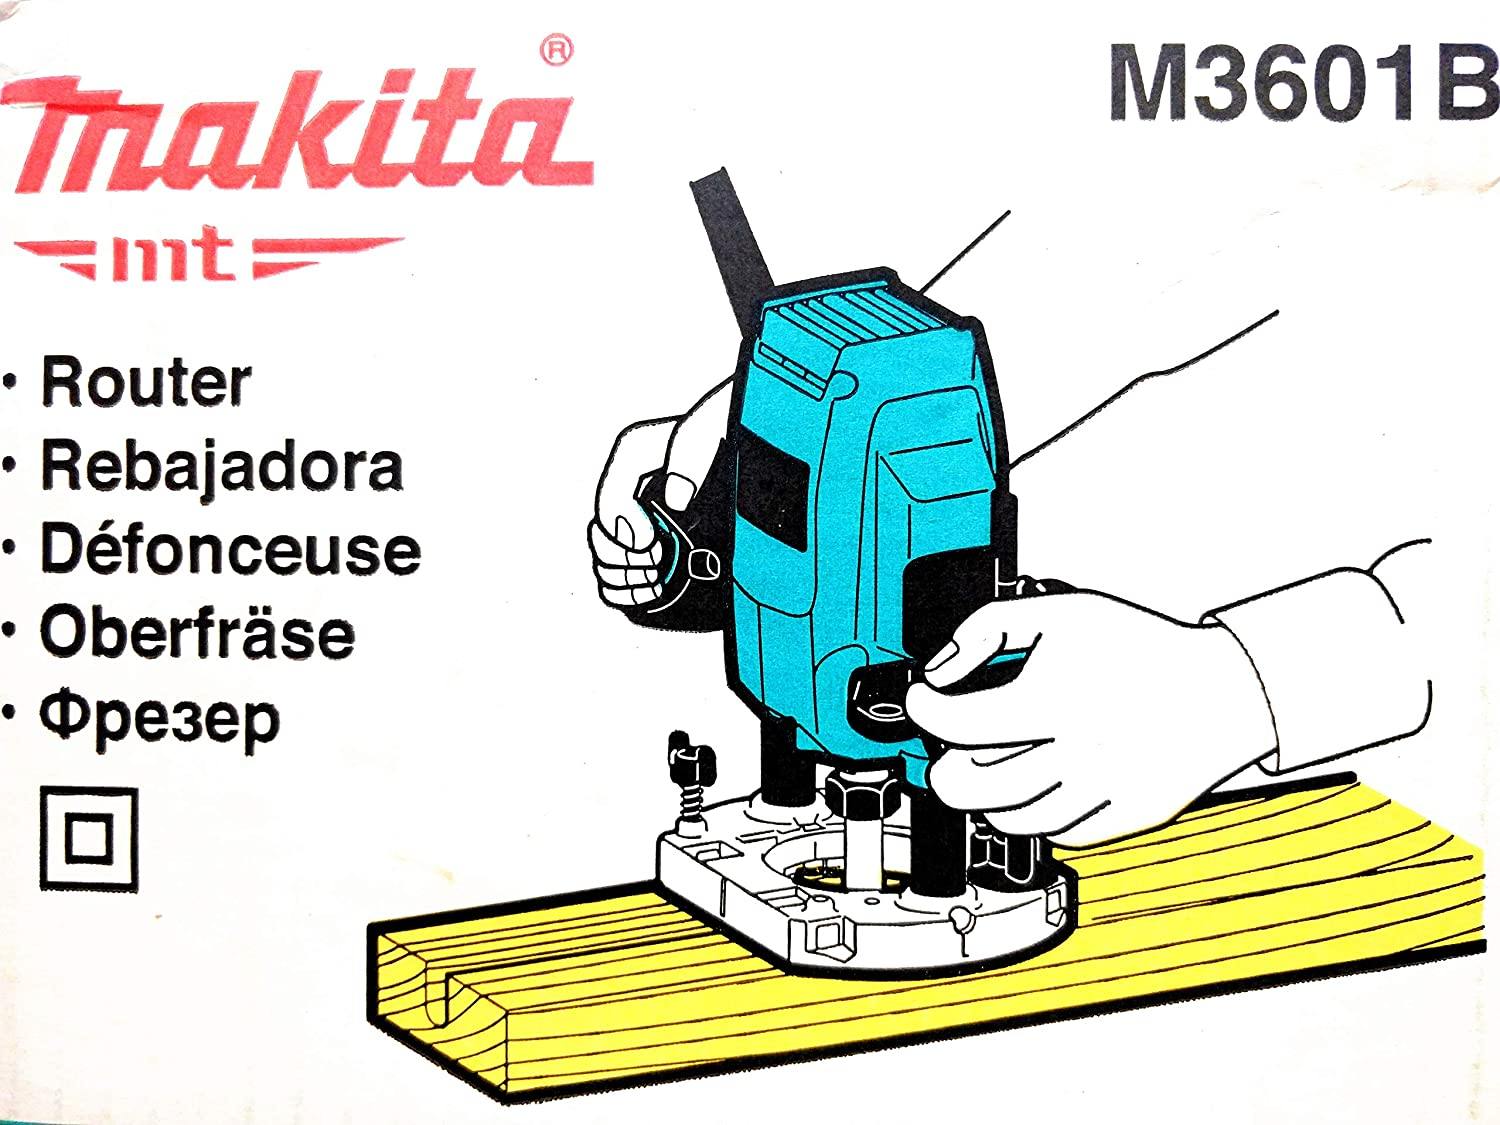 Makita MT Router 1/4" M3601B Power Tool Services